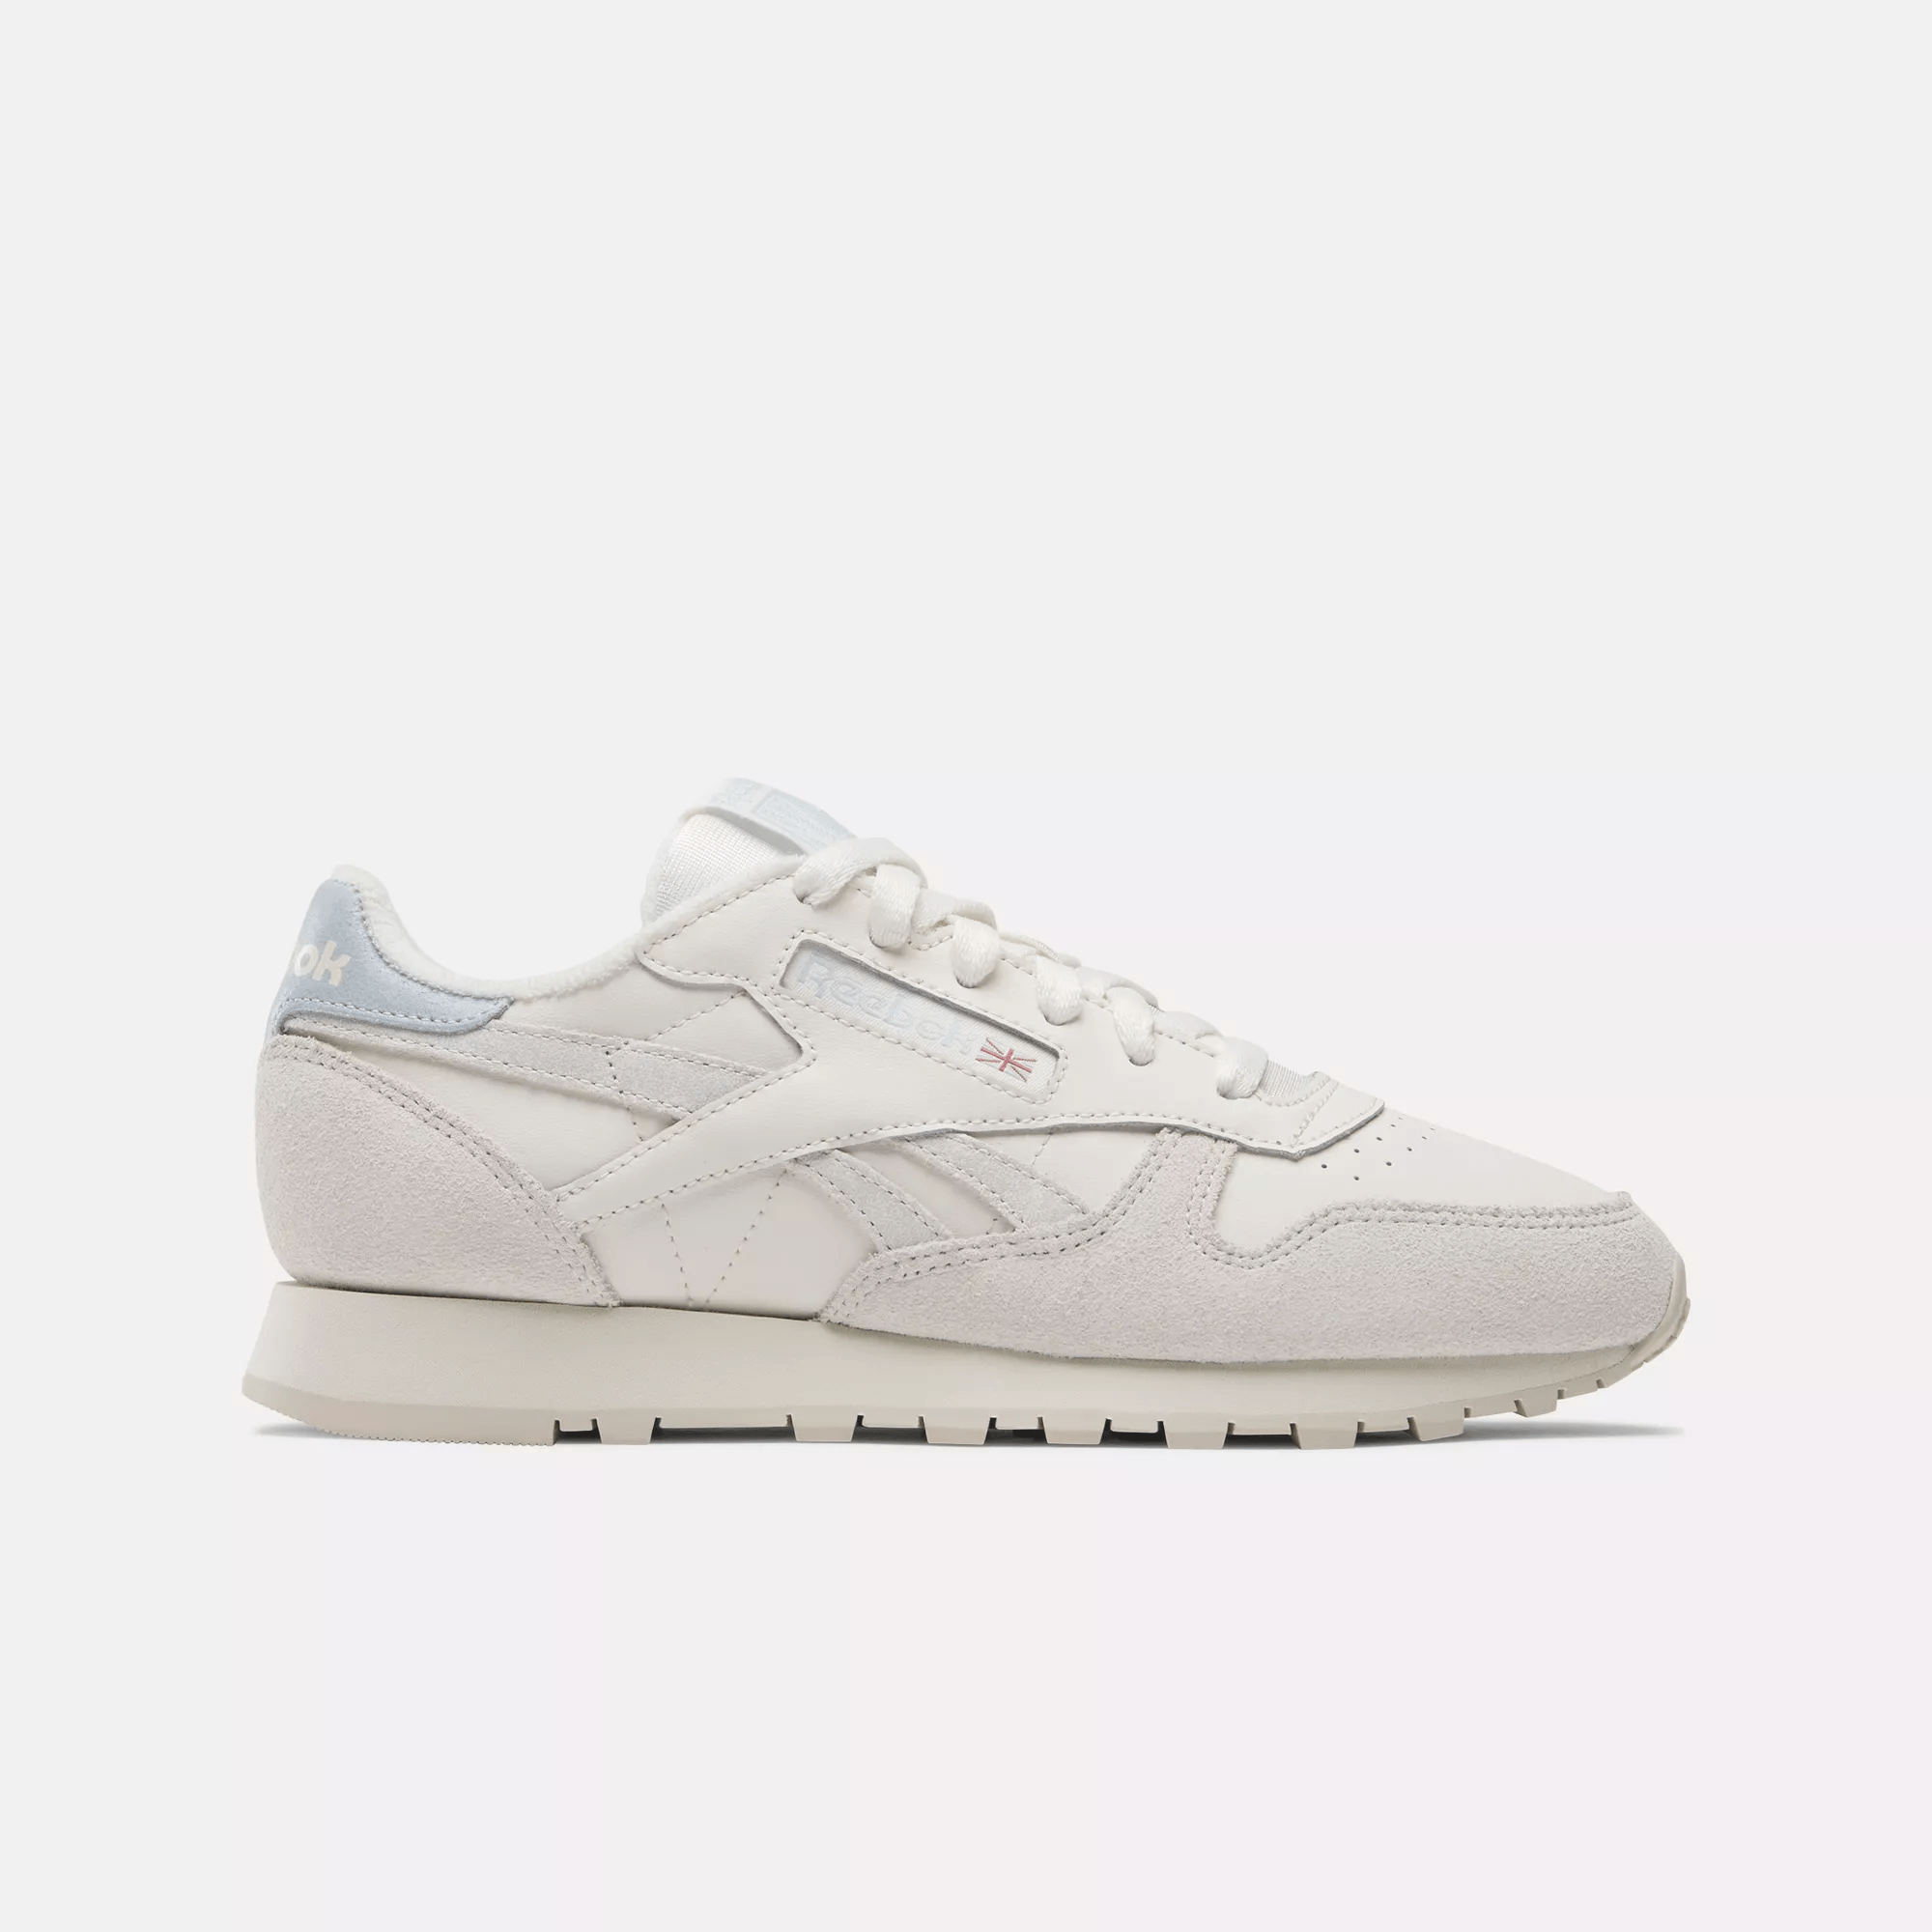 Reebok Classic Leather Women's Shoes In White